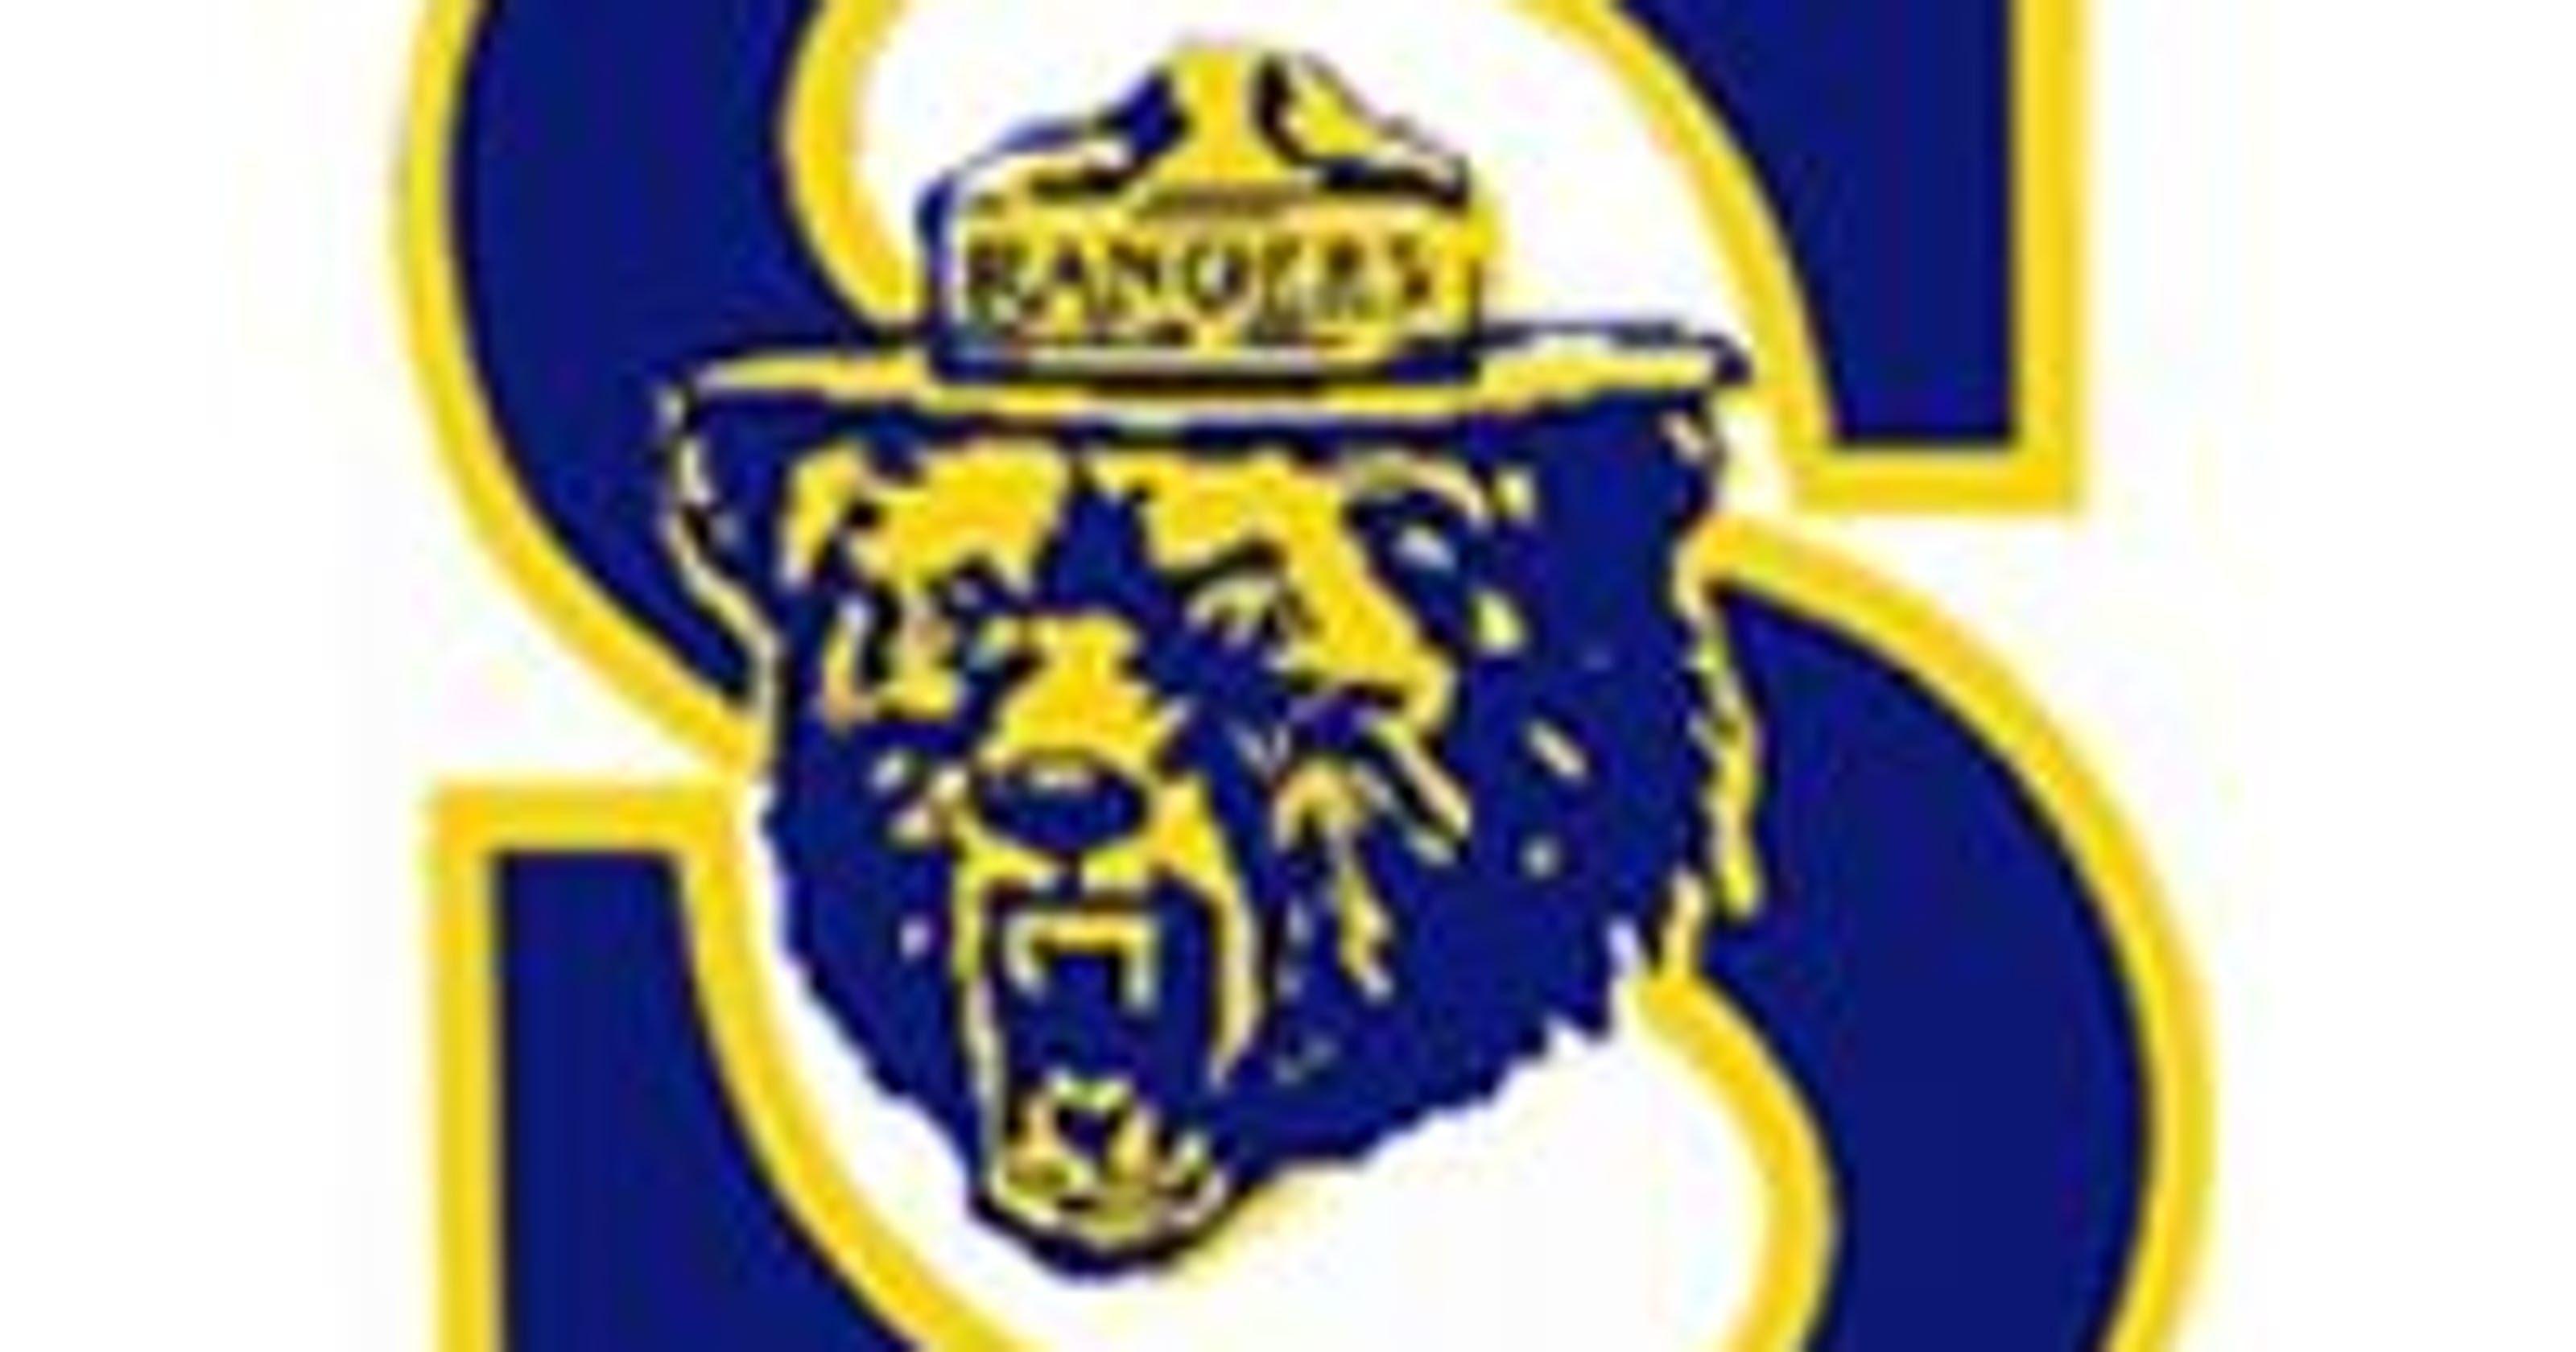 Mourning Logo - Spencerport mourning loss of student